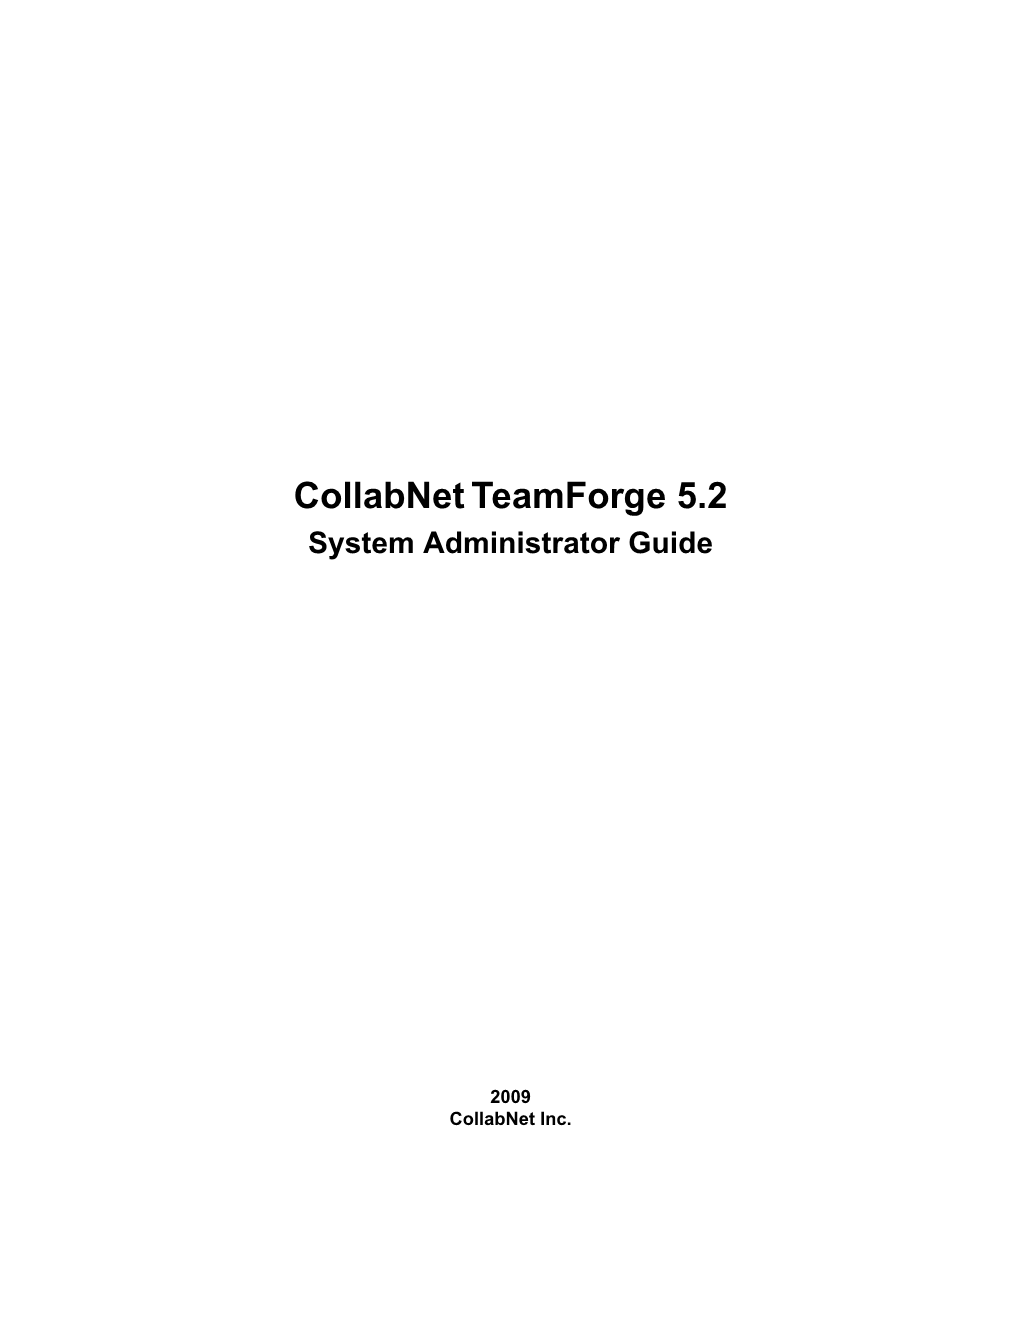 Collabnet Teamforge 5.2 System Administrator Guide